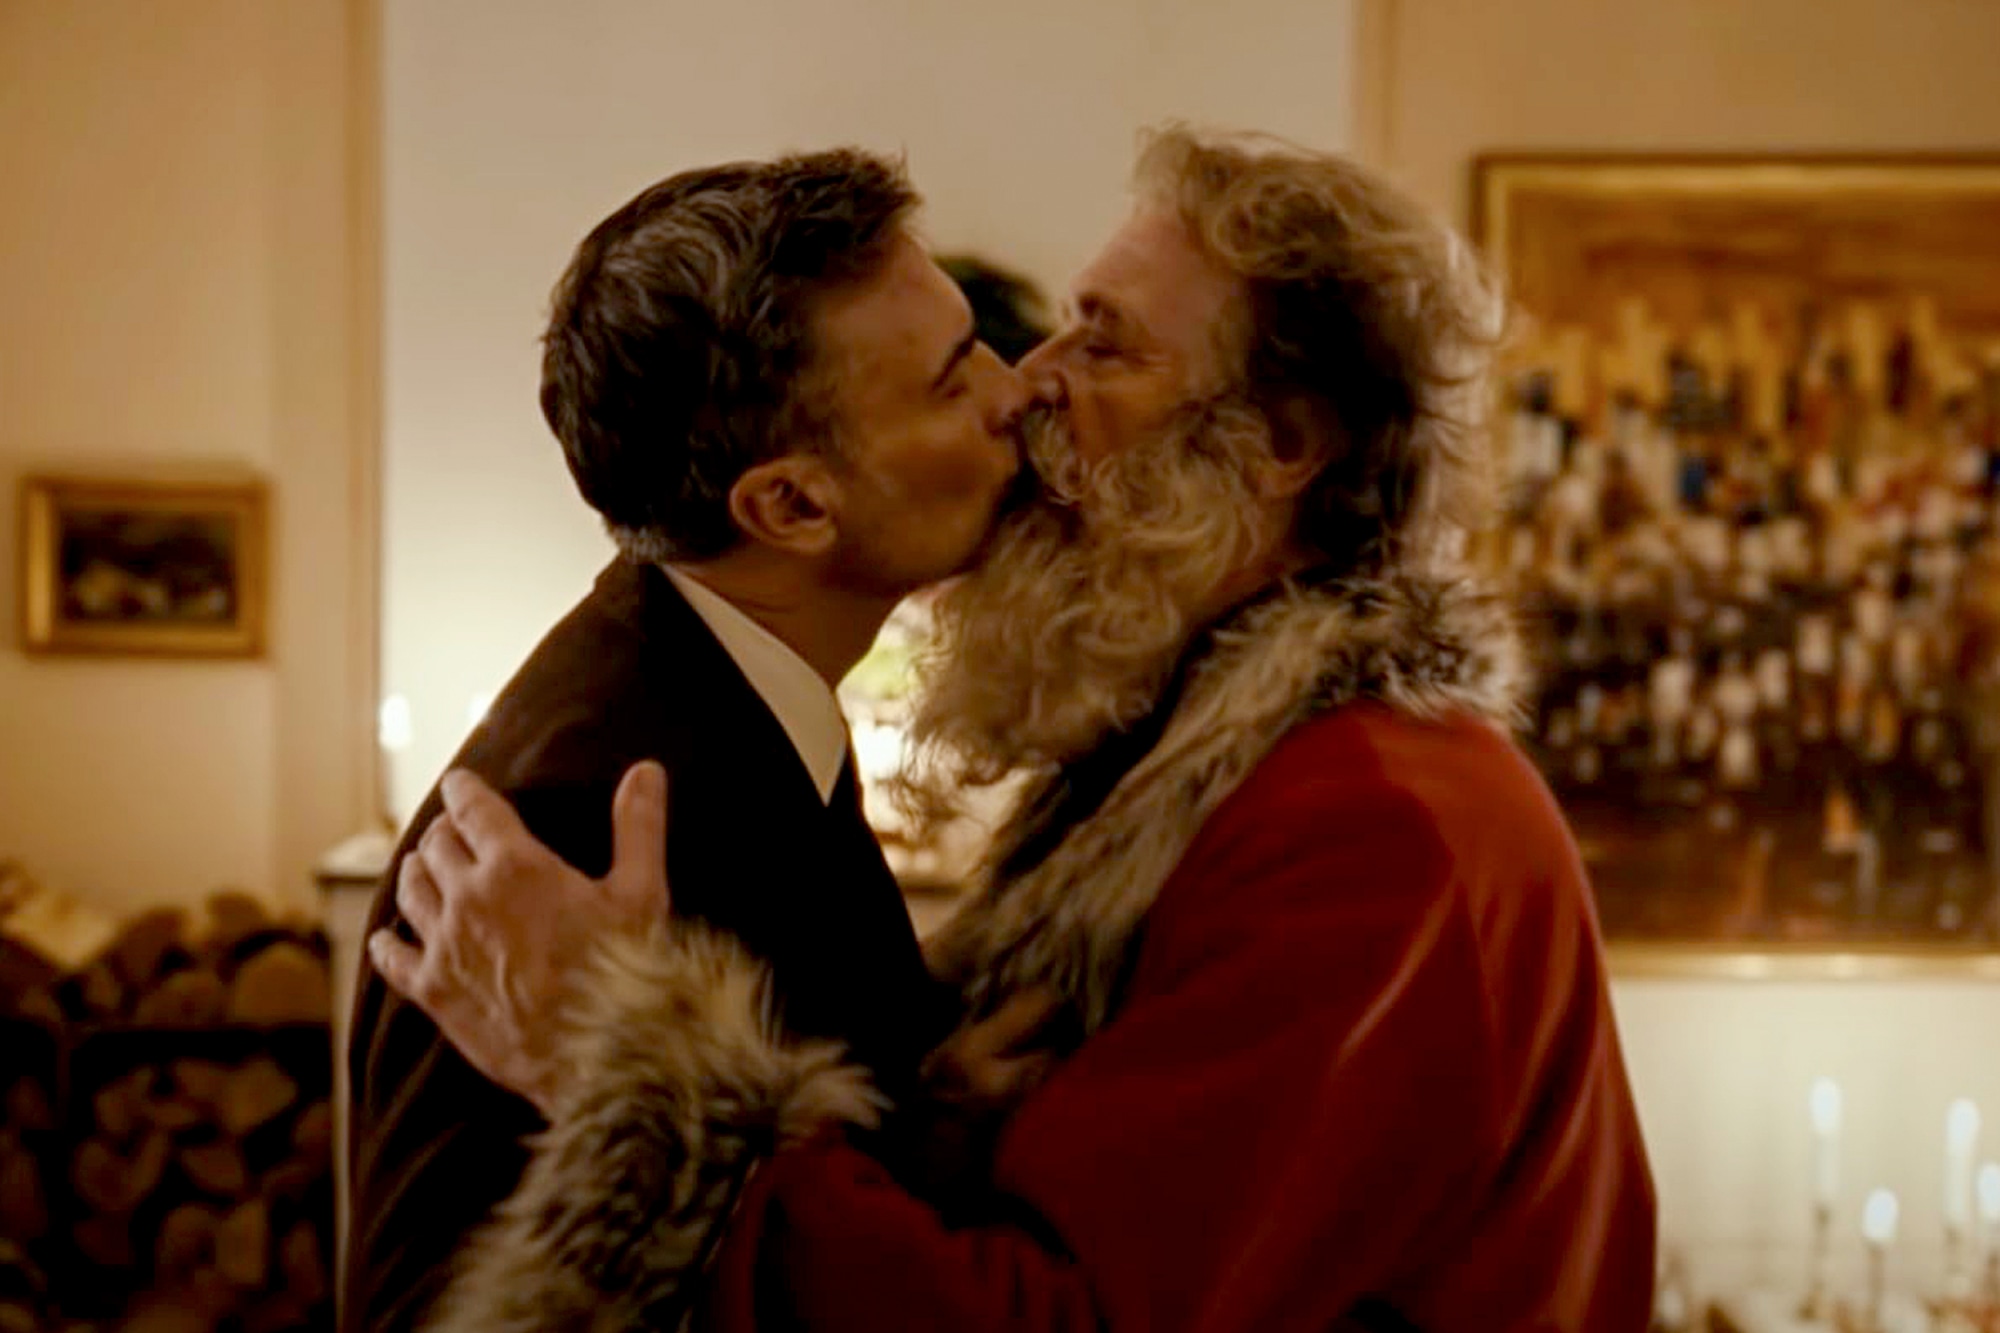 image for Santa Claus Gets A Boyfriend In Norwegian Christmas Commercial